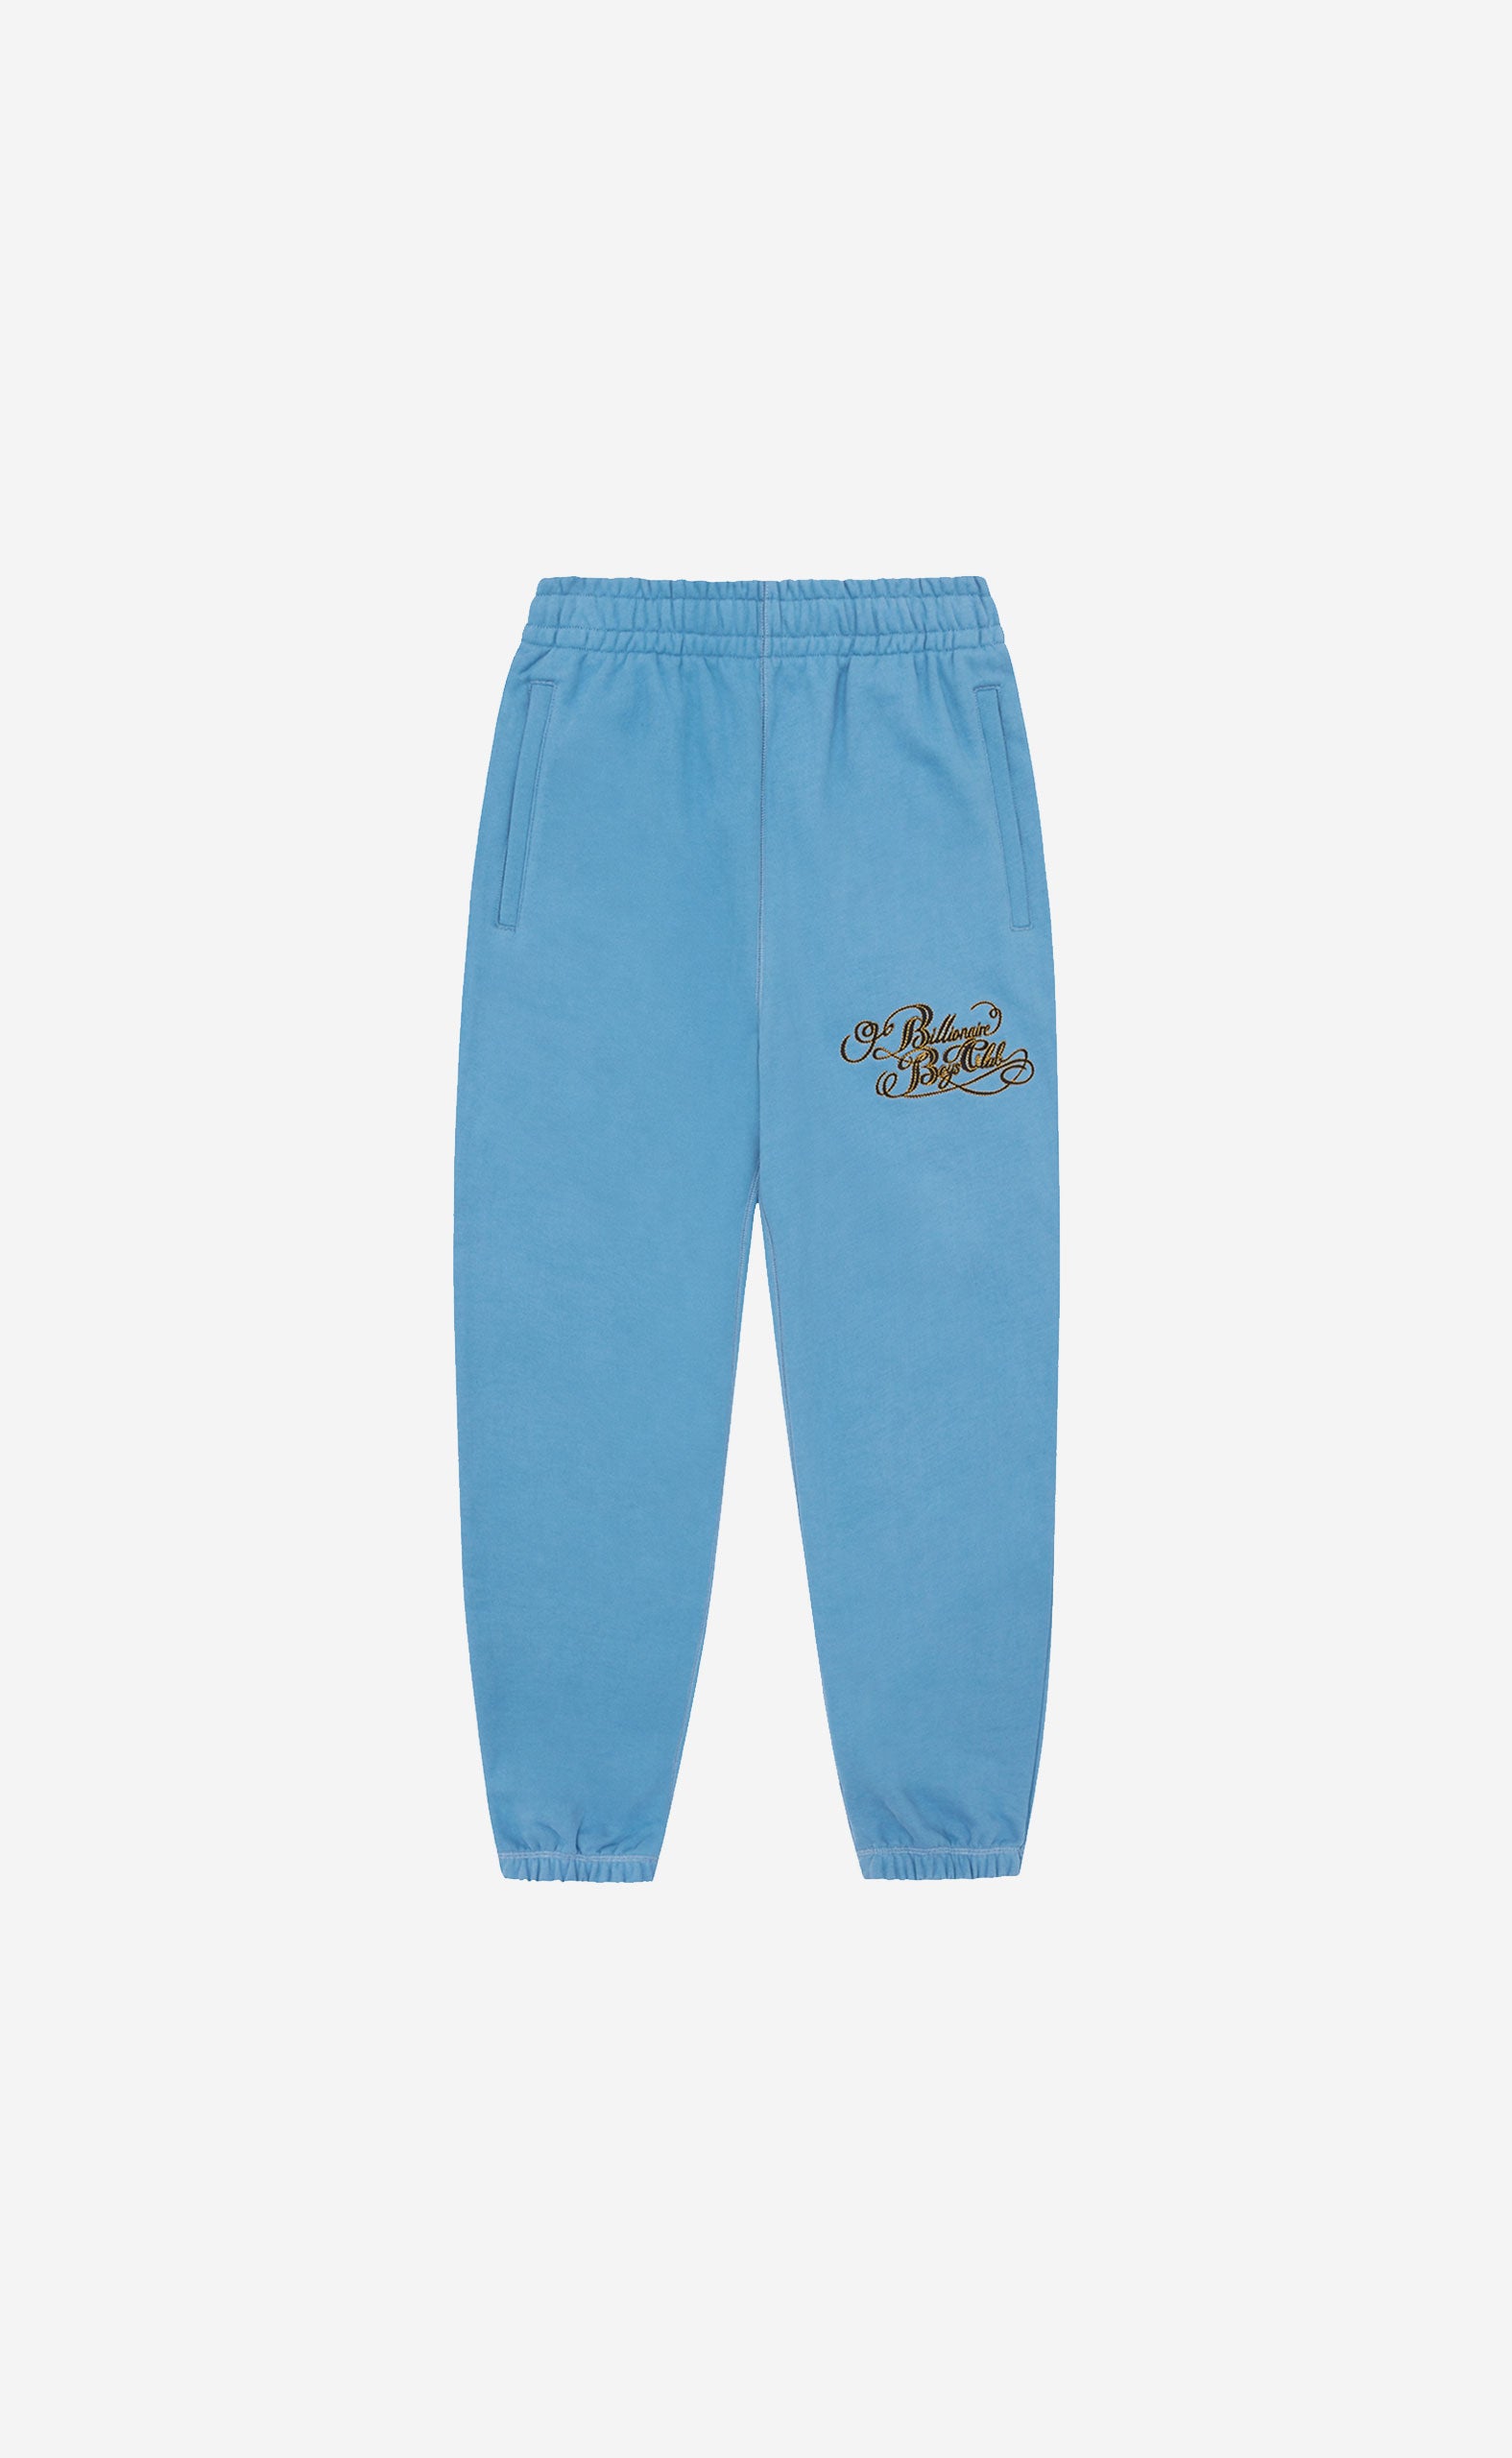 BLUE CALLIGRAPHY LOGO EMBROIDERED SWEATPANTS